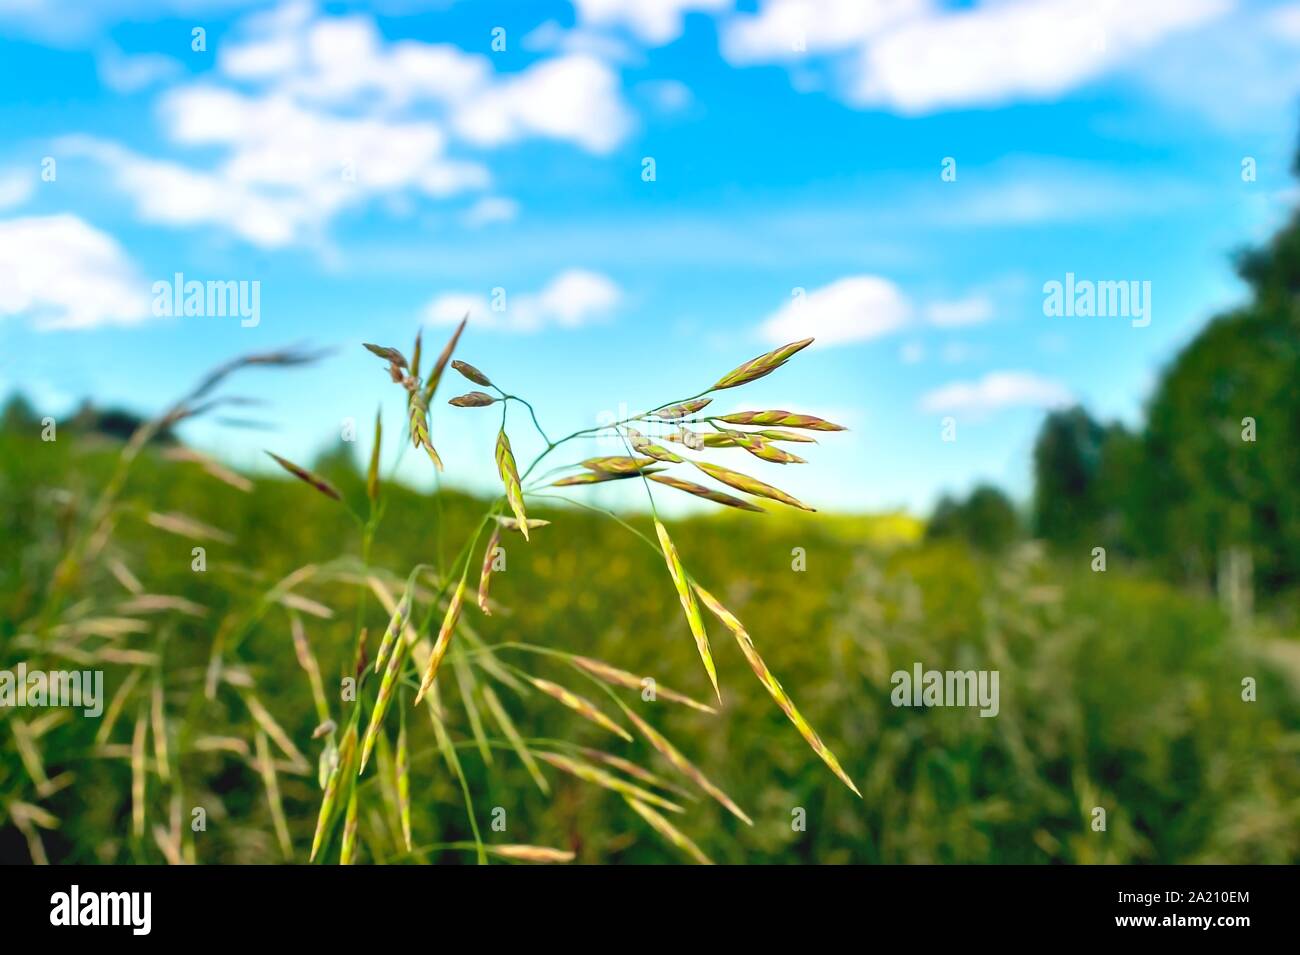 Smooth Brome Grass (Bromus Inermis) on a Colorful Meadow, Blue Sky, White Clouds, Trees, in Highland Area on a Summer Day. Bromegrass is a Roadside or Stock Photo